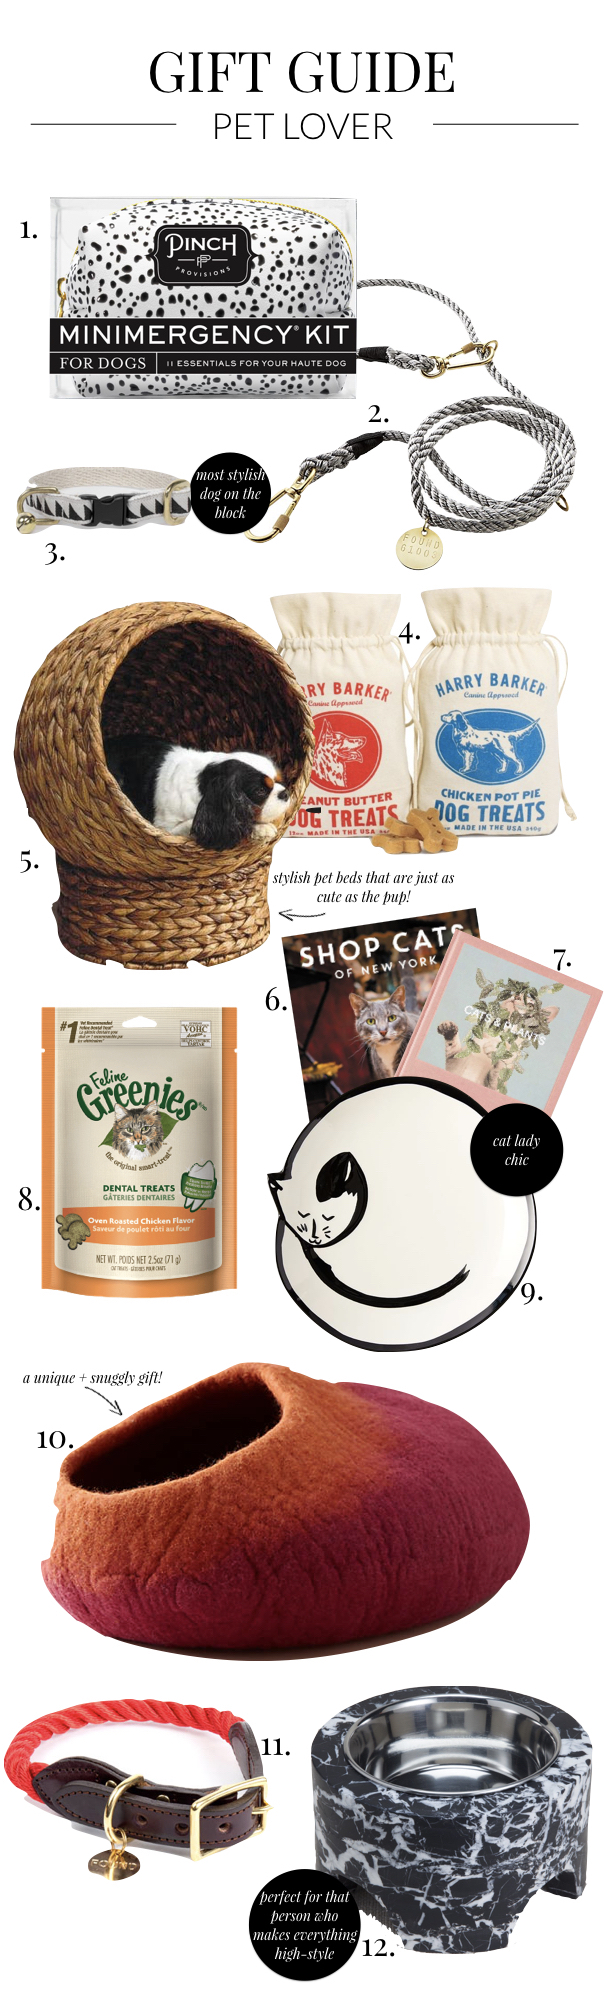 Holiday 2017 Gift Guides: Pet Lover